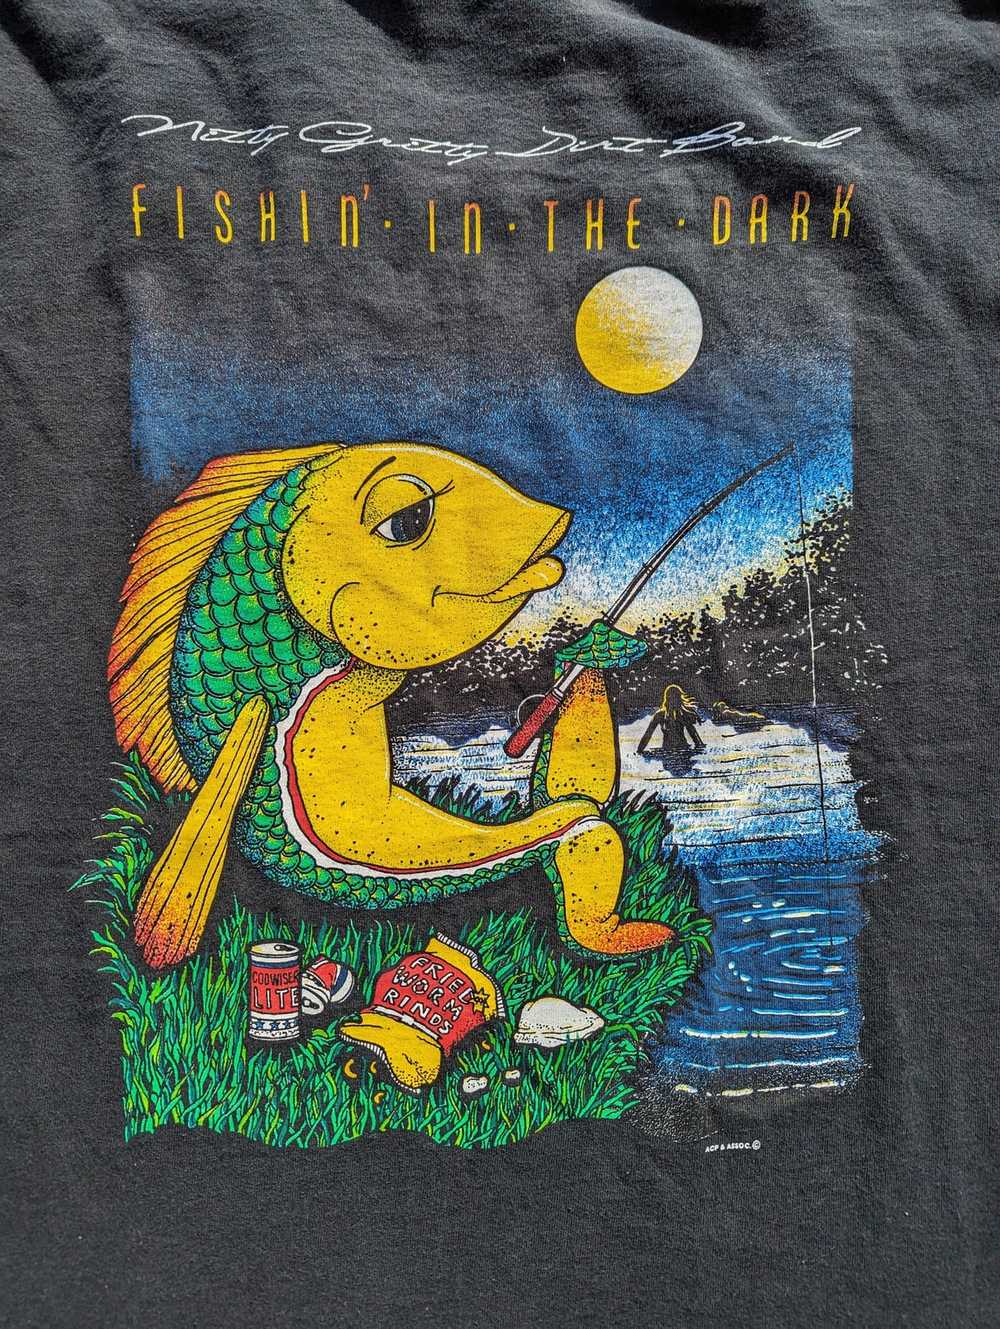 Vintage Nitty Gritty Dirt Band T Shirt Vintage Fishing In The Dark